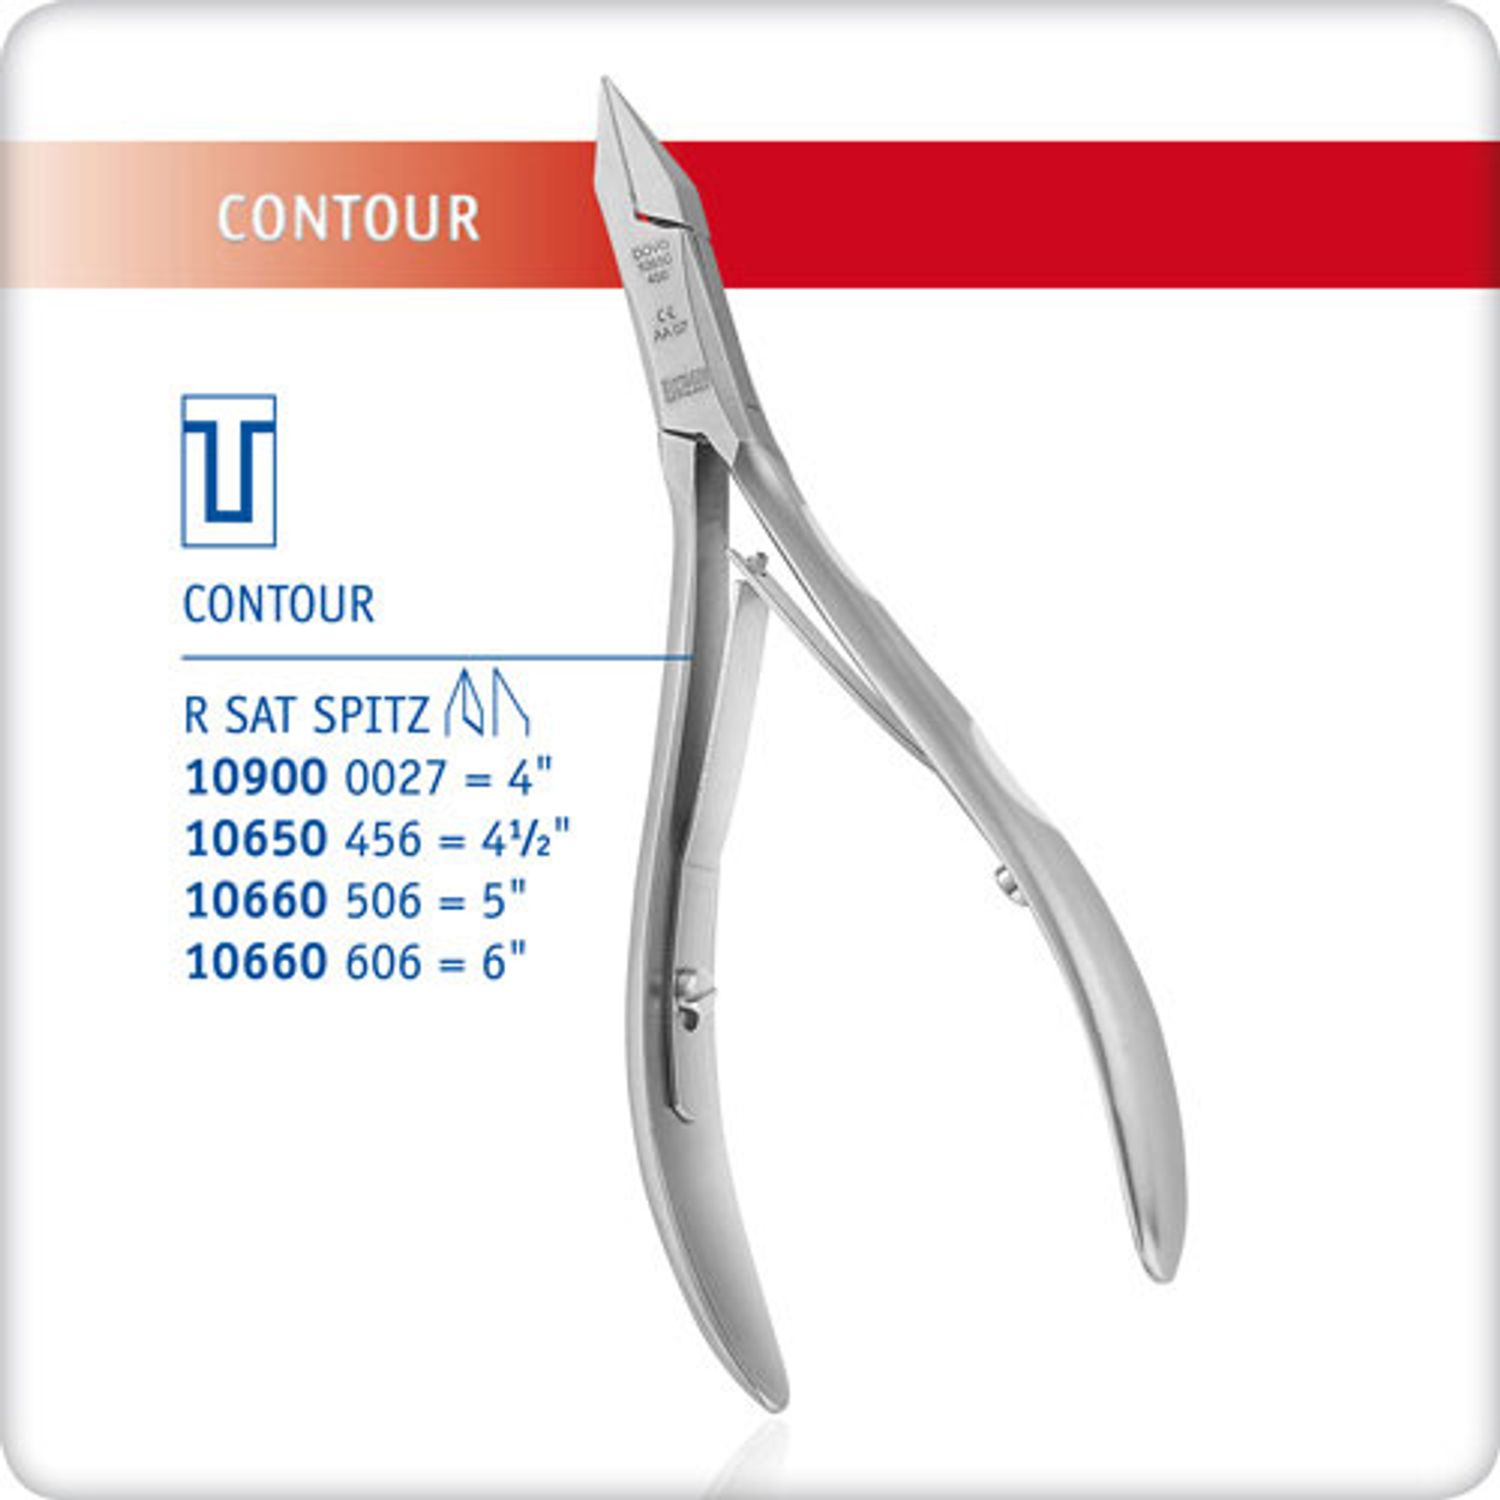 Dovo Contoured Cuticle Nippers 4 1 2 Overall Knifecenter 10650 456